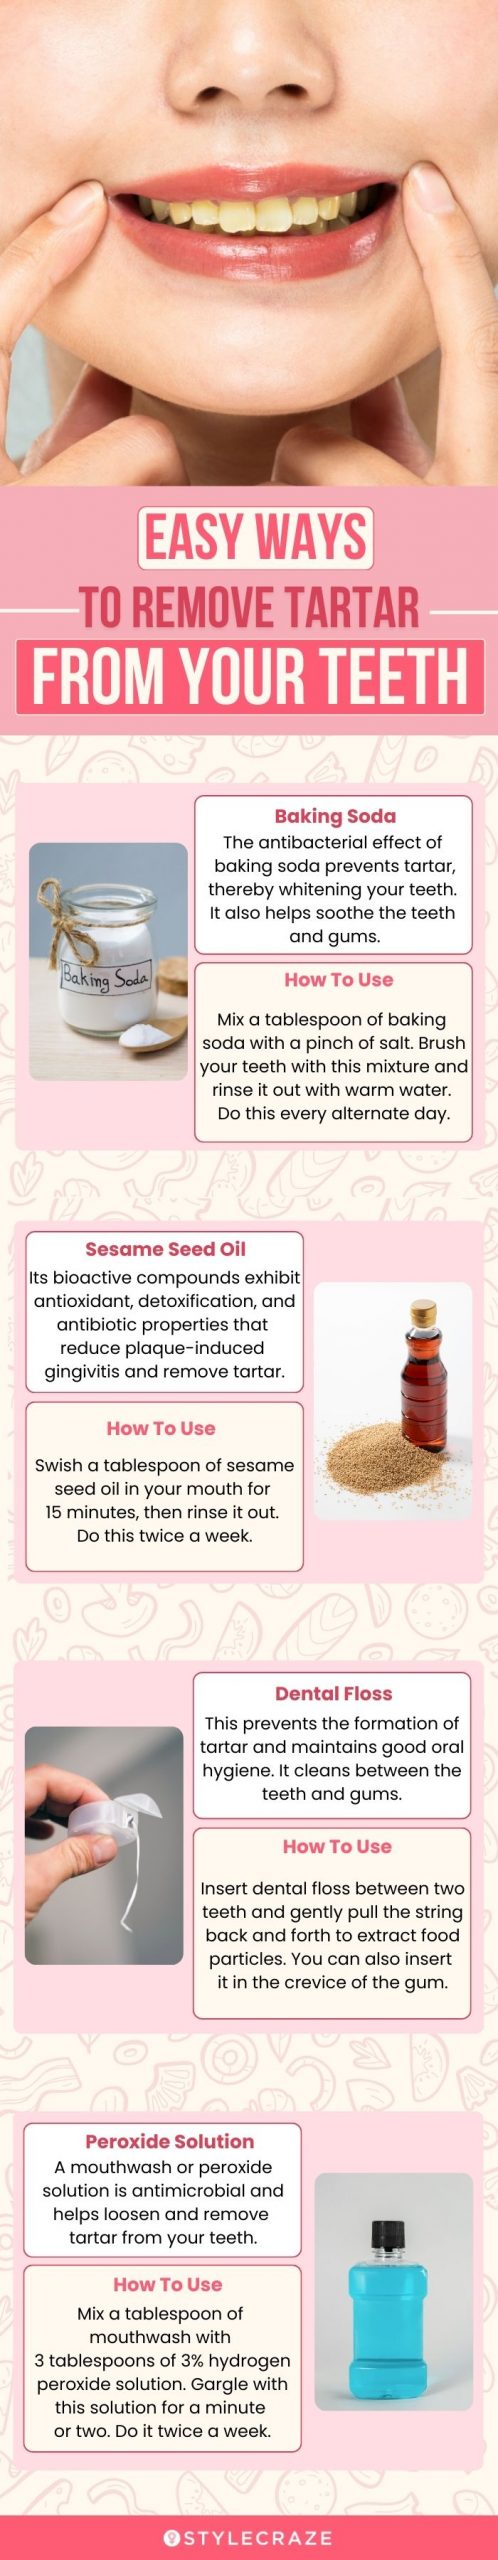 easy ways to remove tartar from your teeth (infographic)